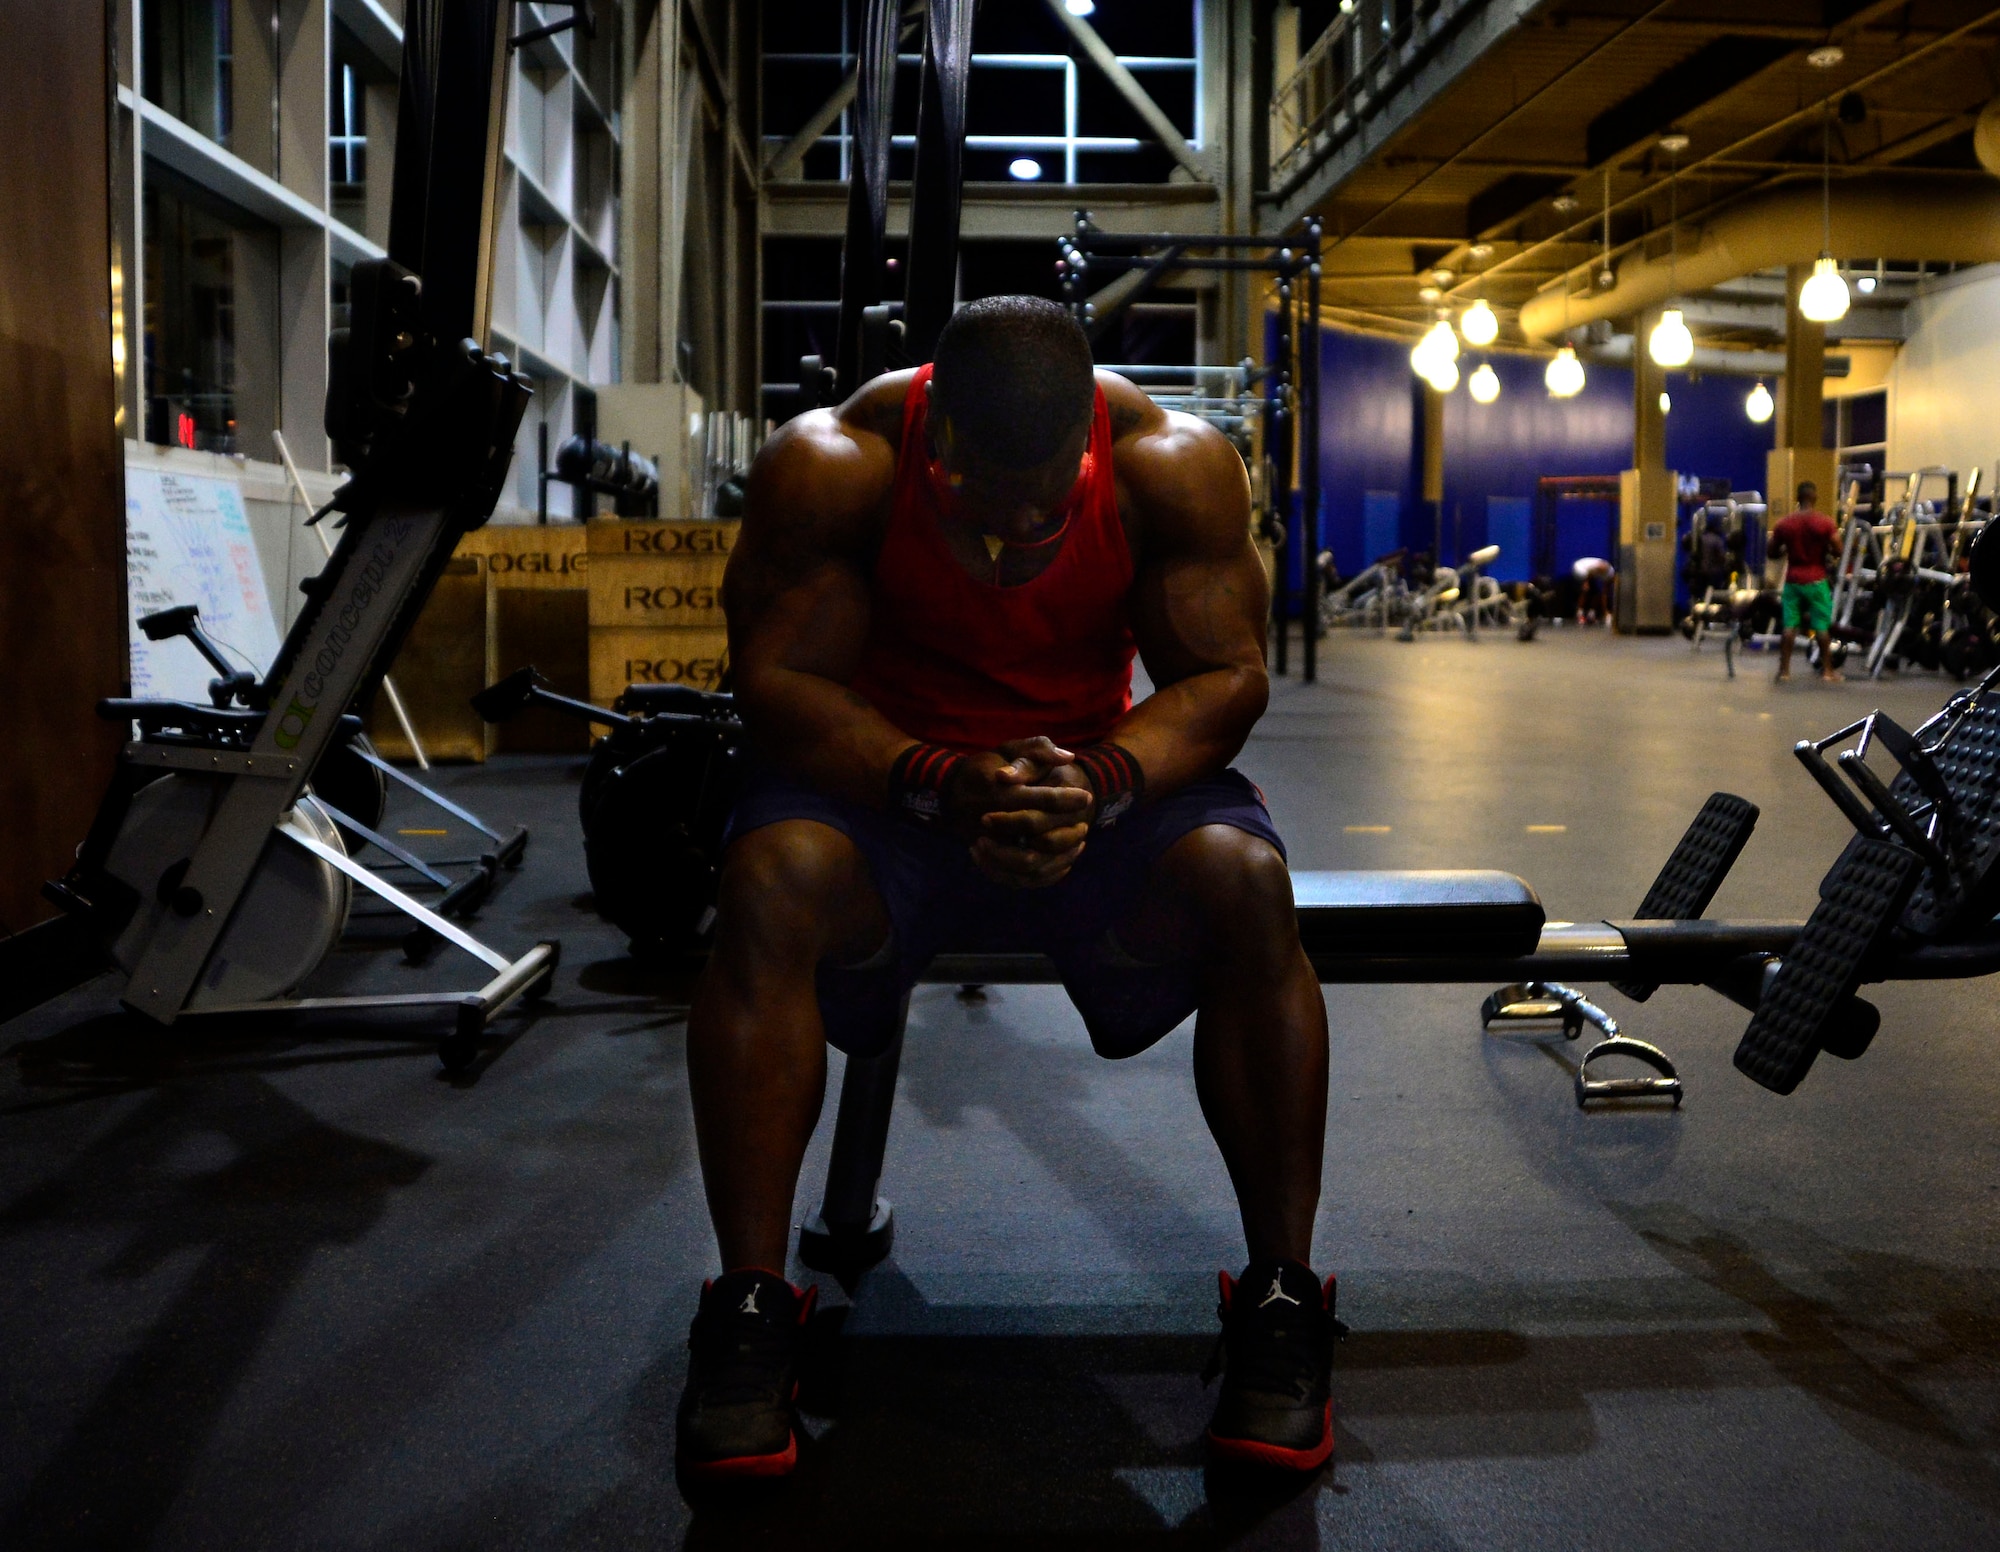 Tech. Sgt. David, 432nd Maintenance Group contract officer representative, rests during a workout Dec. 4, 2015, at Nellis Air Force Base, Nevada. David is a professional bodybuilder in the International Federation of Bodybuilding and Fitness. (U.S. Air Force photo by Airman 1st Class Christian Clausen/Released)